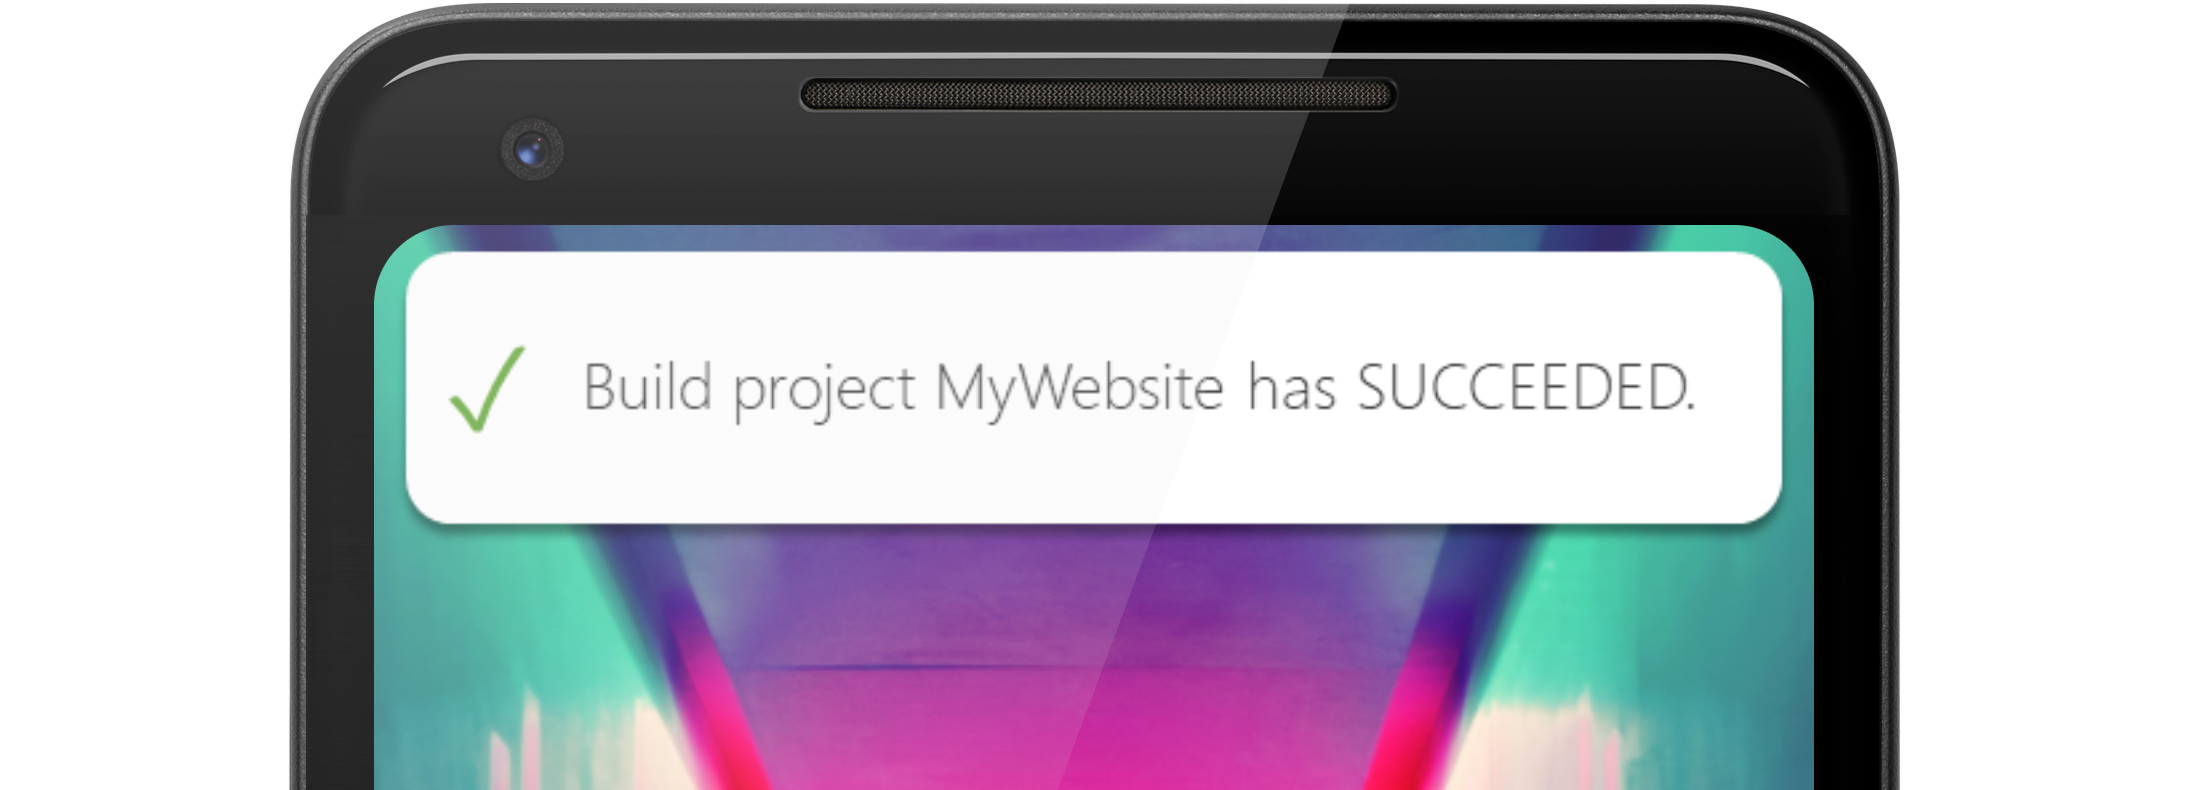 A mobile phone showing a successful notification with the text &ldquo;Build project MyWebsite has succeeded&rdquo;.